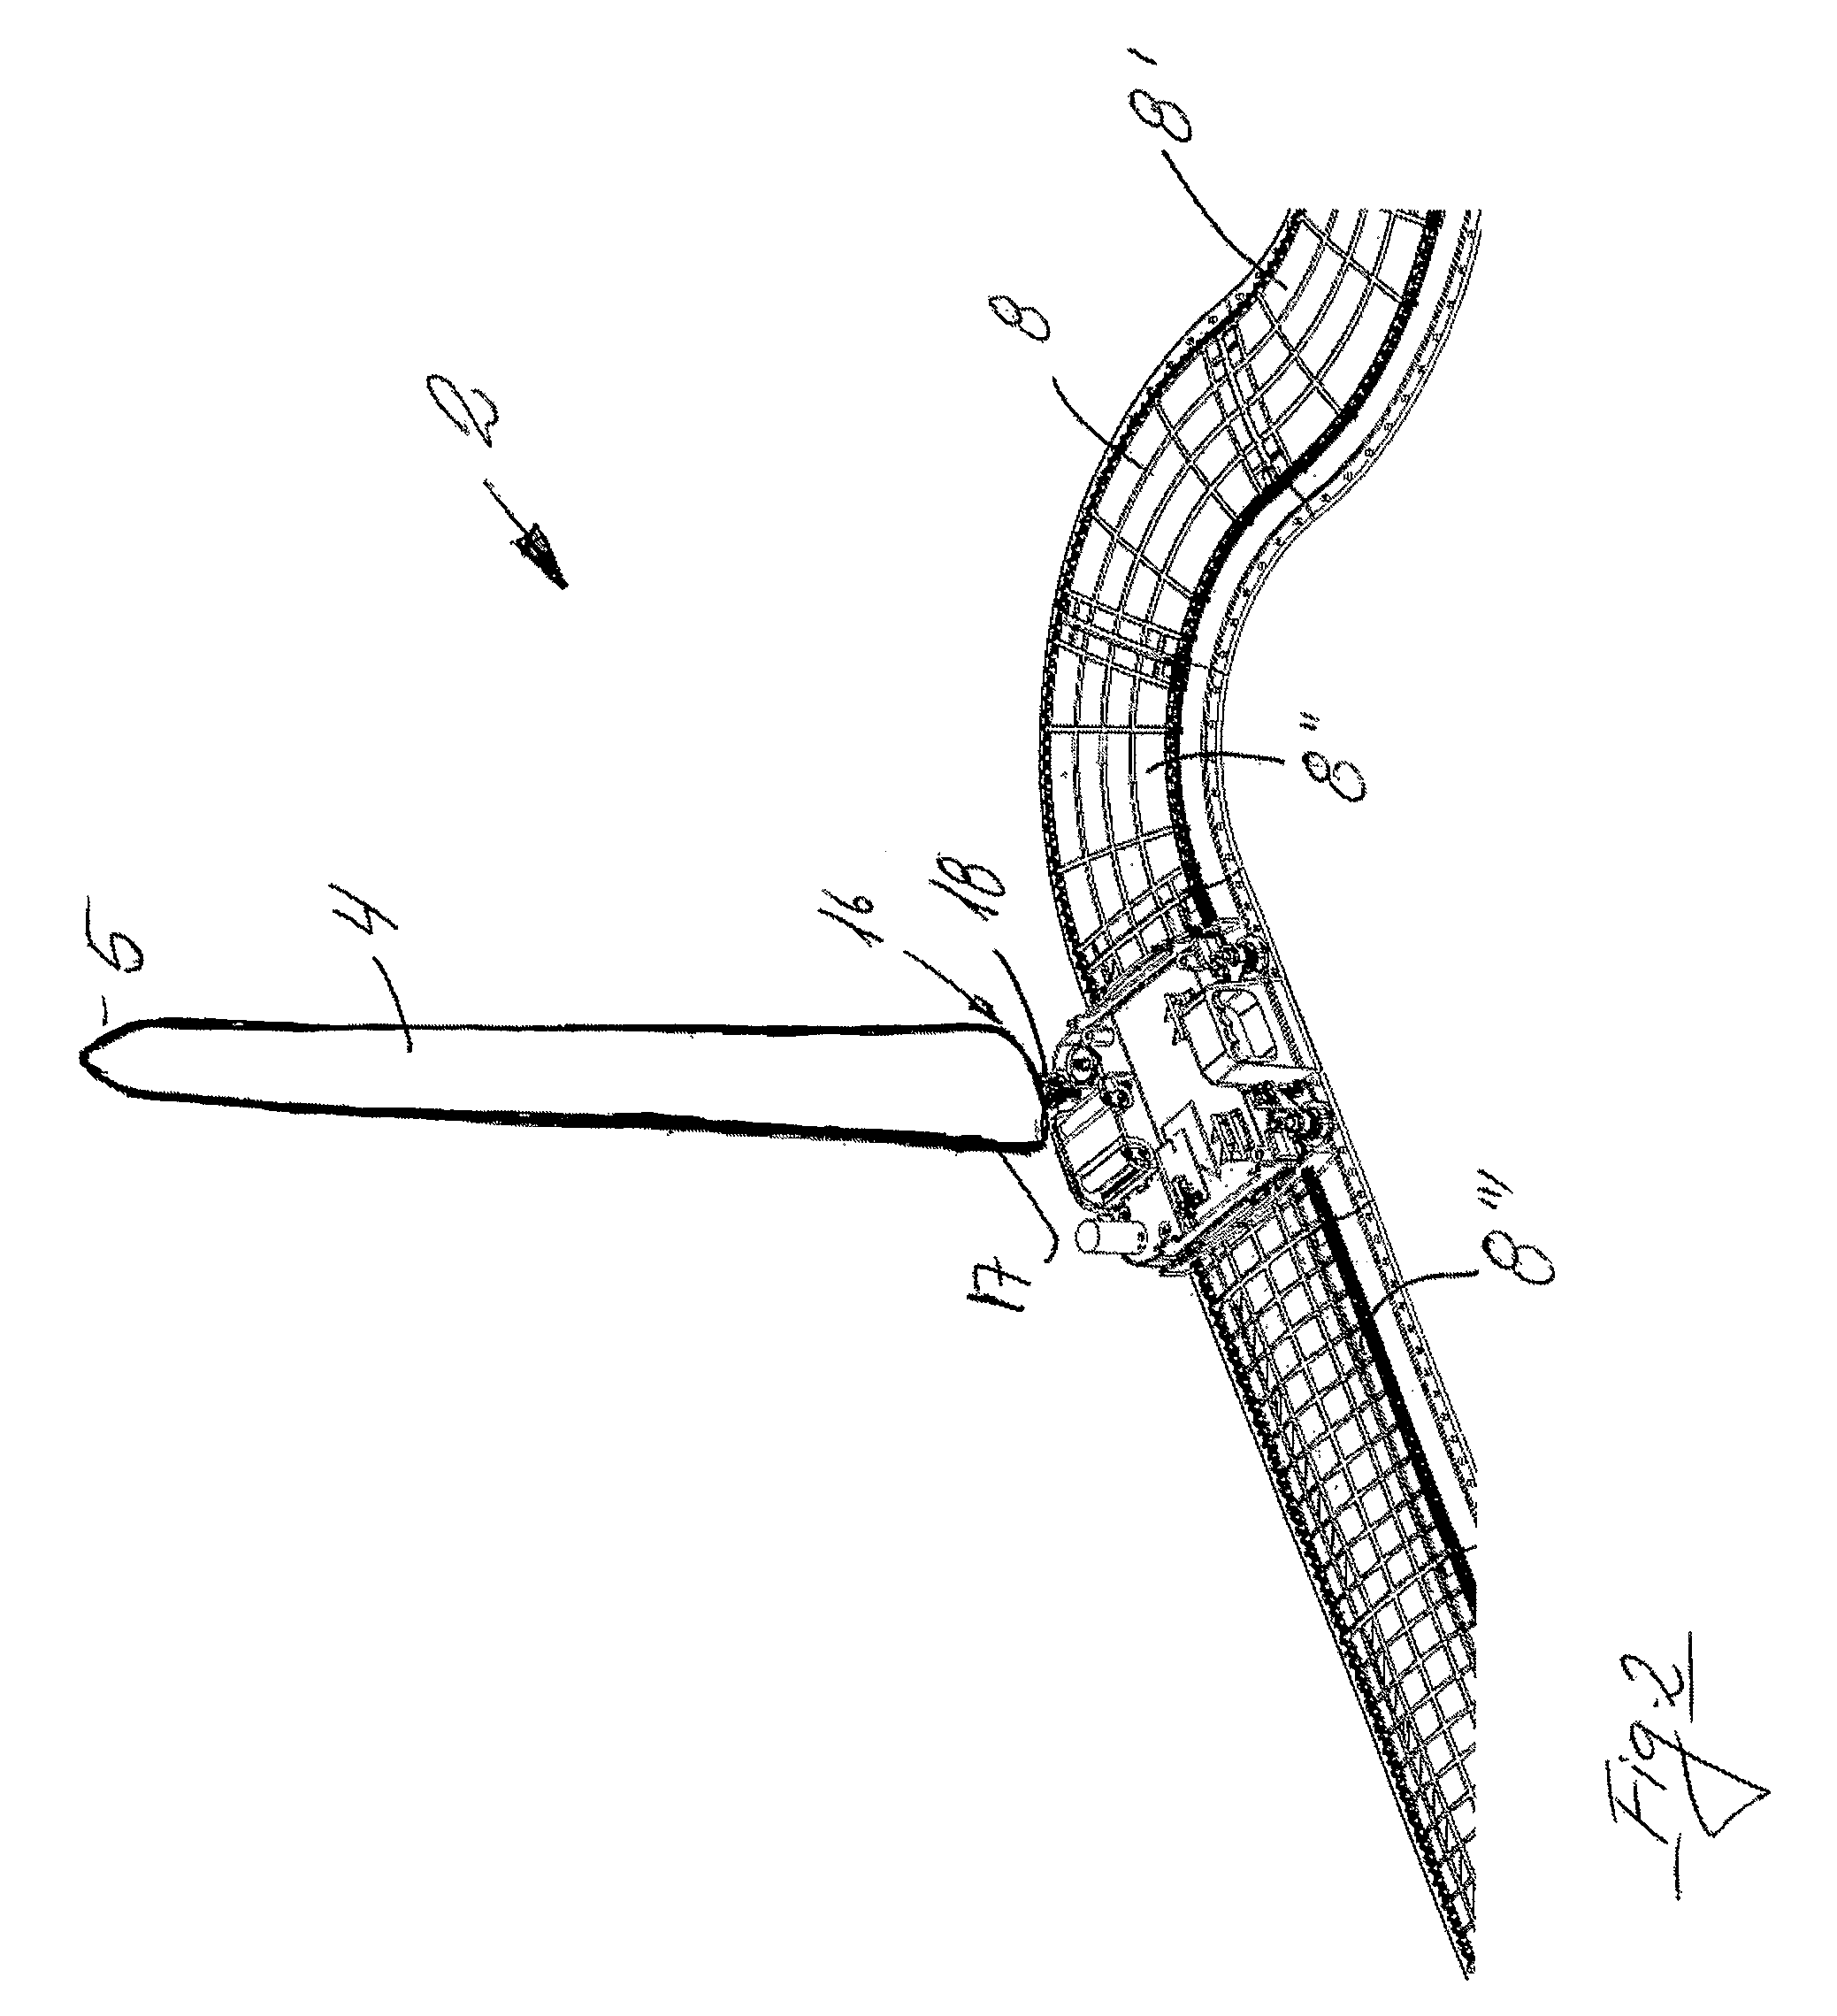 Mink-fox transportation system for individual transfer/transport in connection with the production of mink/fox pelts